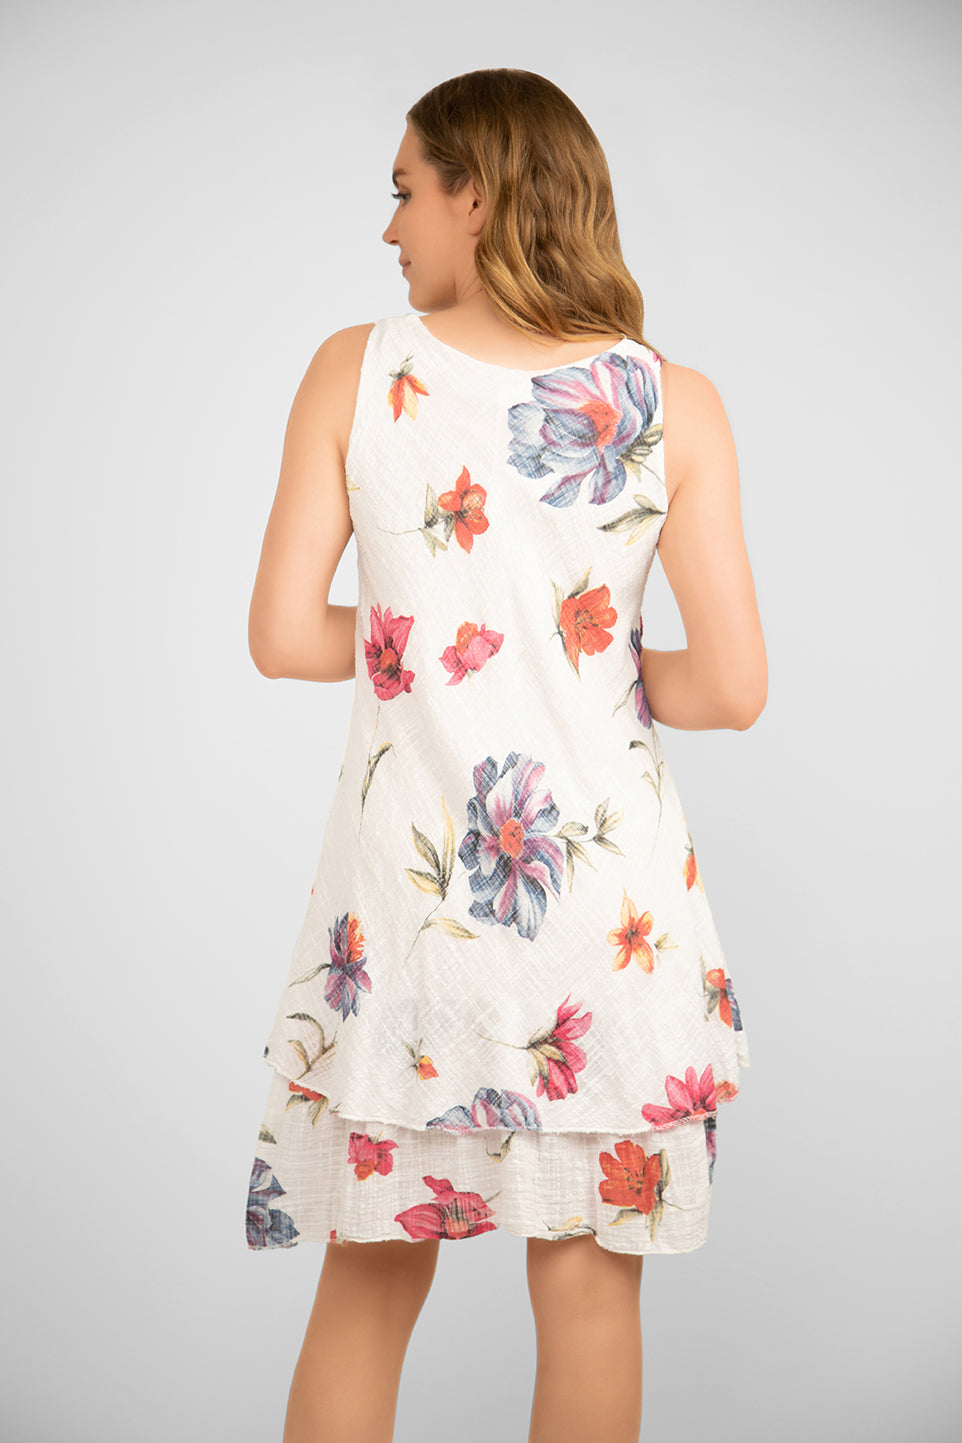 Back view of Me & Gee (S24-16-HL8903) Women's Sleeveless Floral Gauze Dress With Layered Knee Length Skirt in White with Floral Print